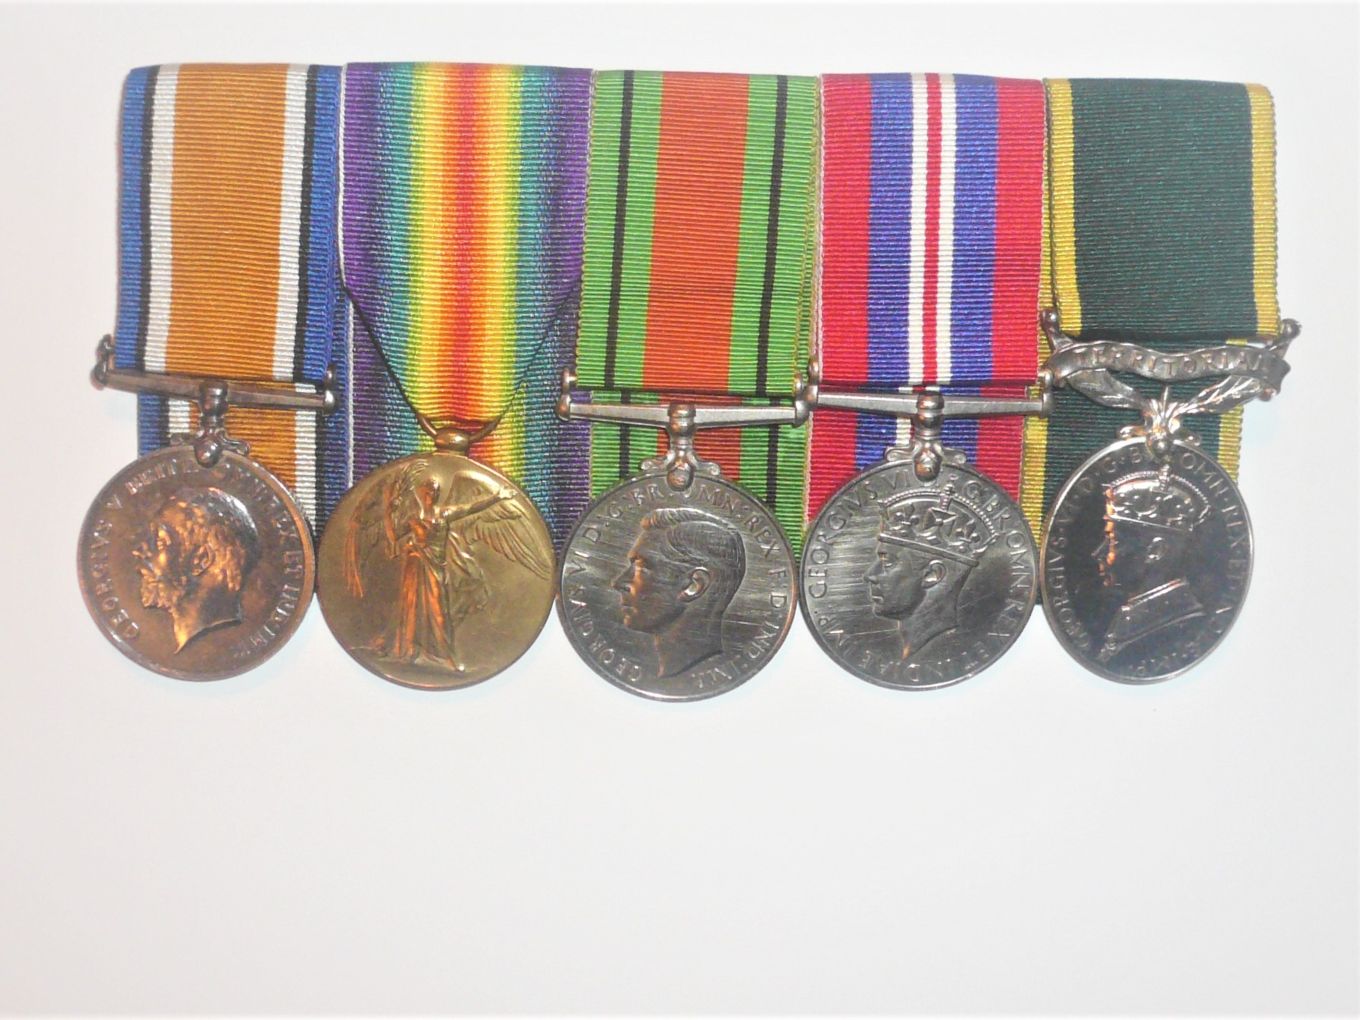 Pte Alfred William John Conder's medals